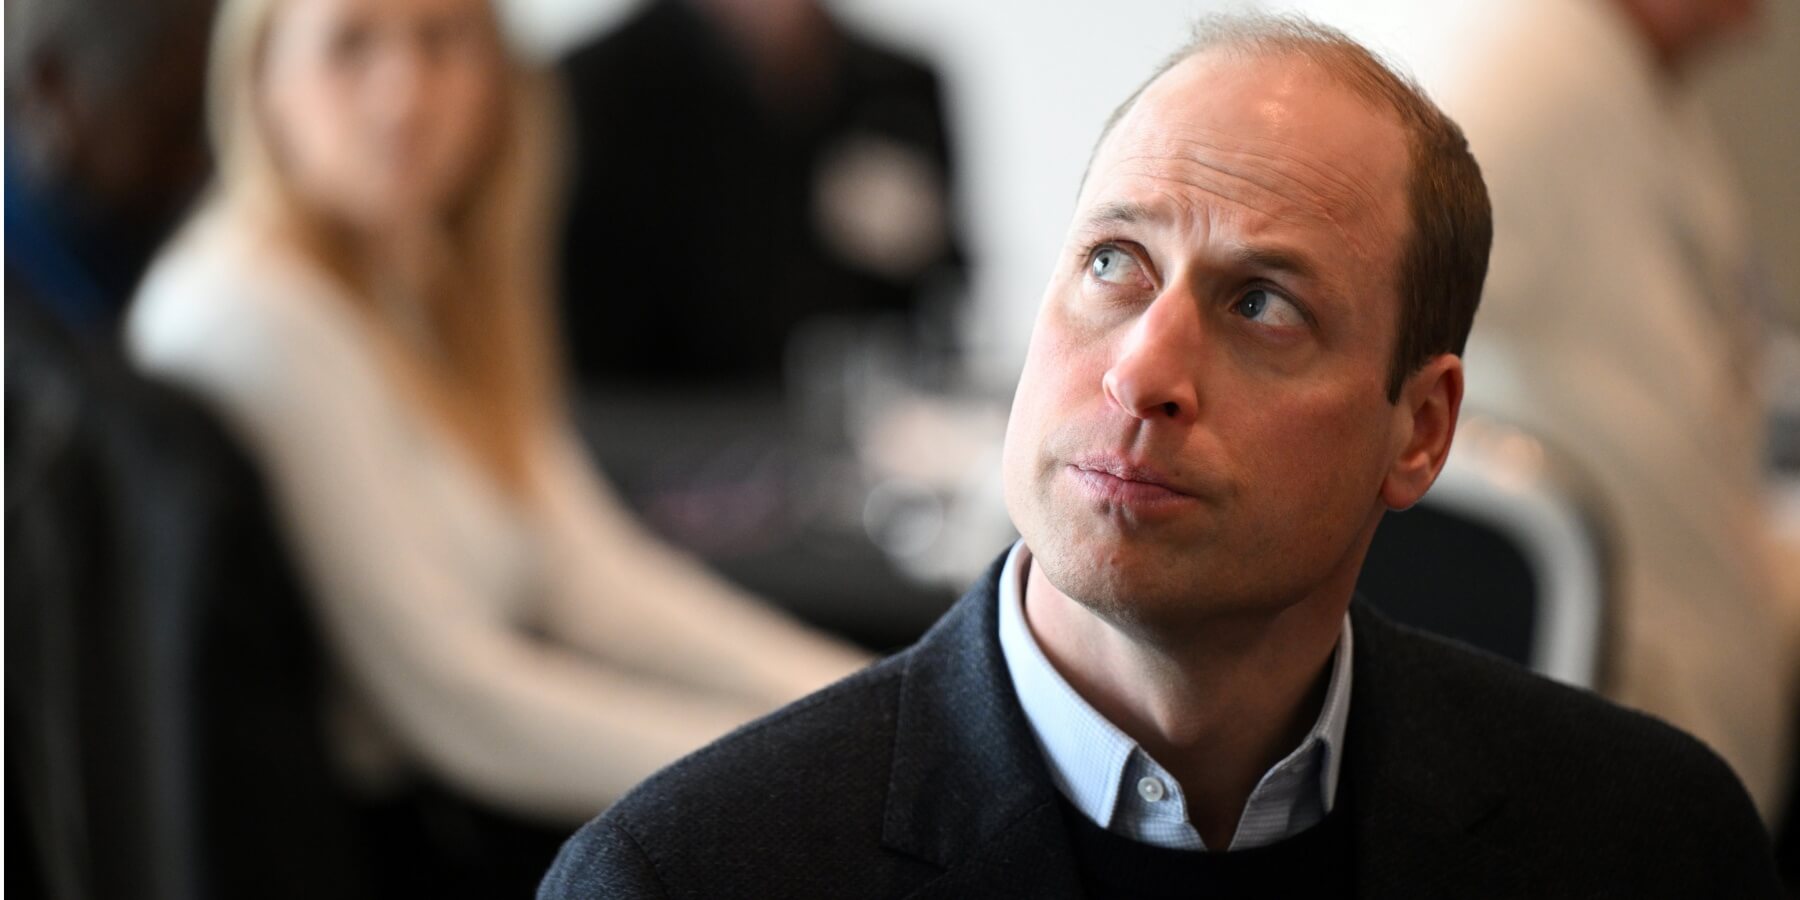 Prince William may change how he moves forward as a working royal